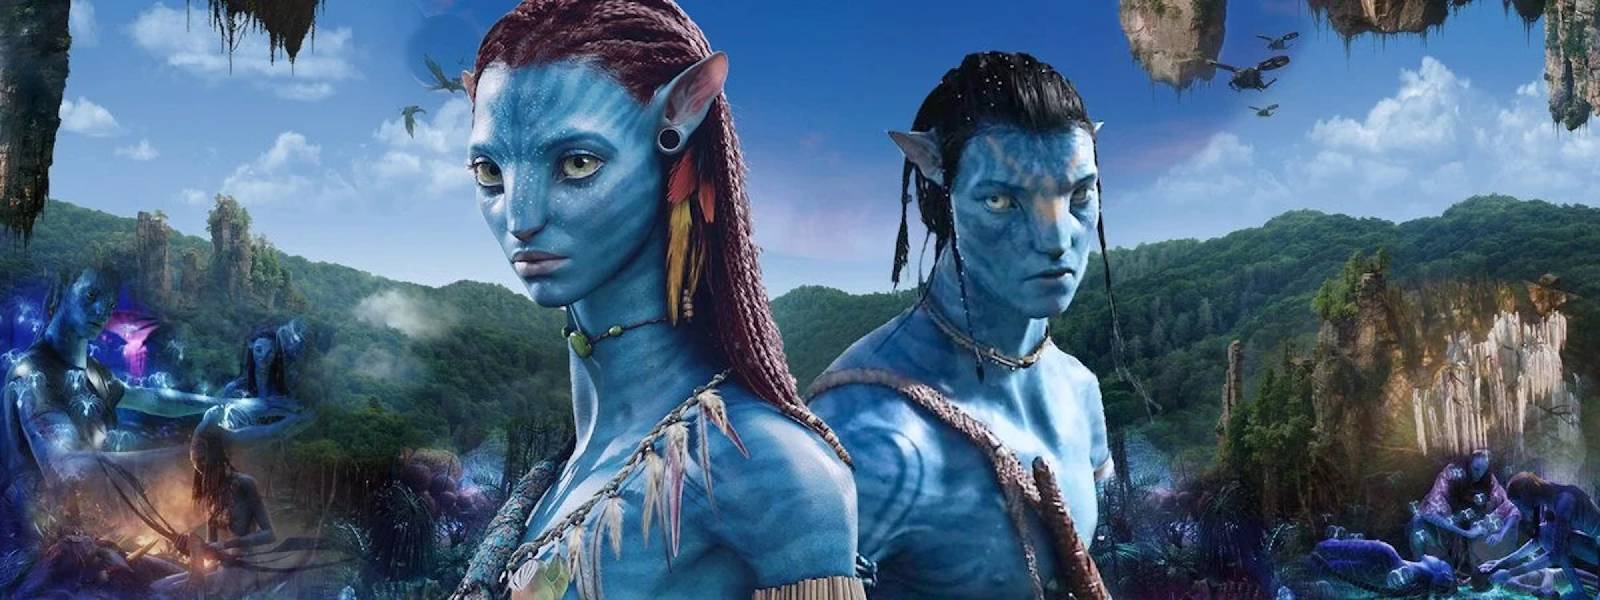 Avatar 2 is 6th ever film to gross USD 2 billion